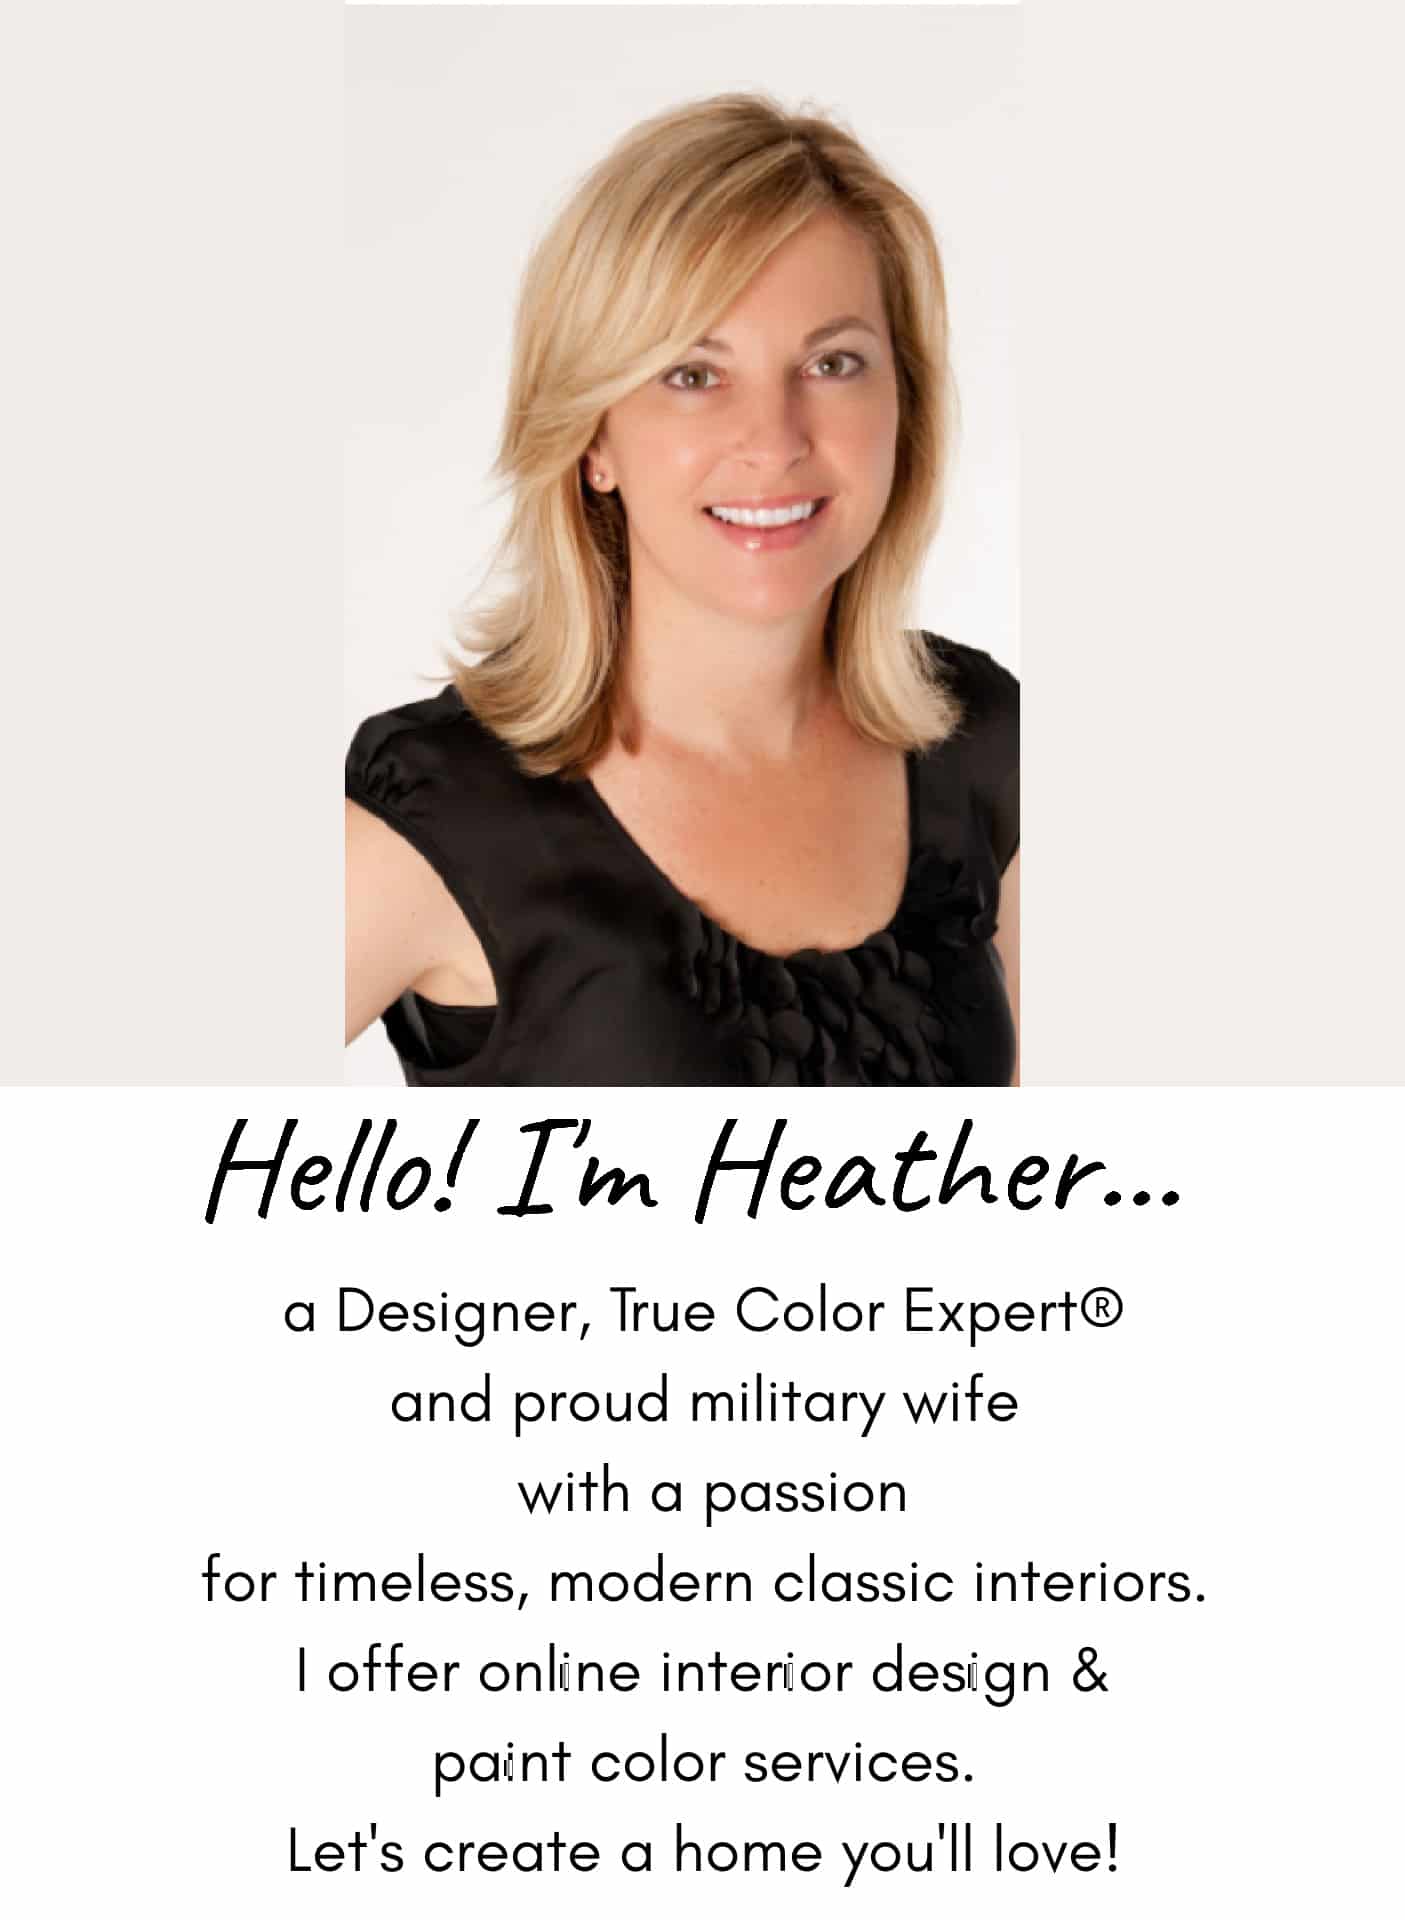 Hello! I'm Heather - Designer and True Color Expert at Setting For Four Interiors!